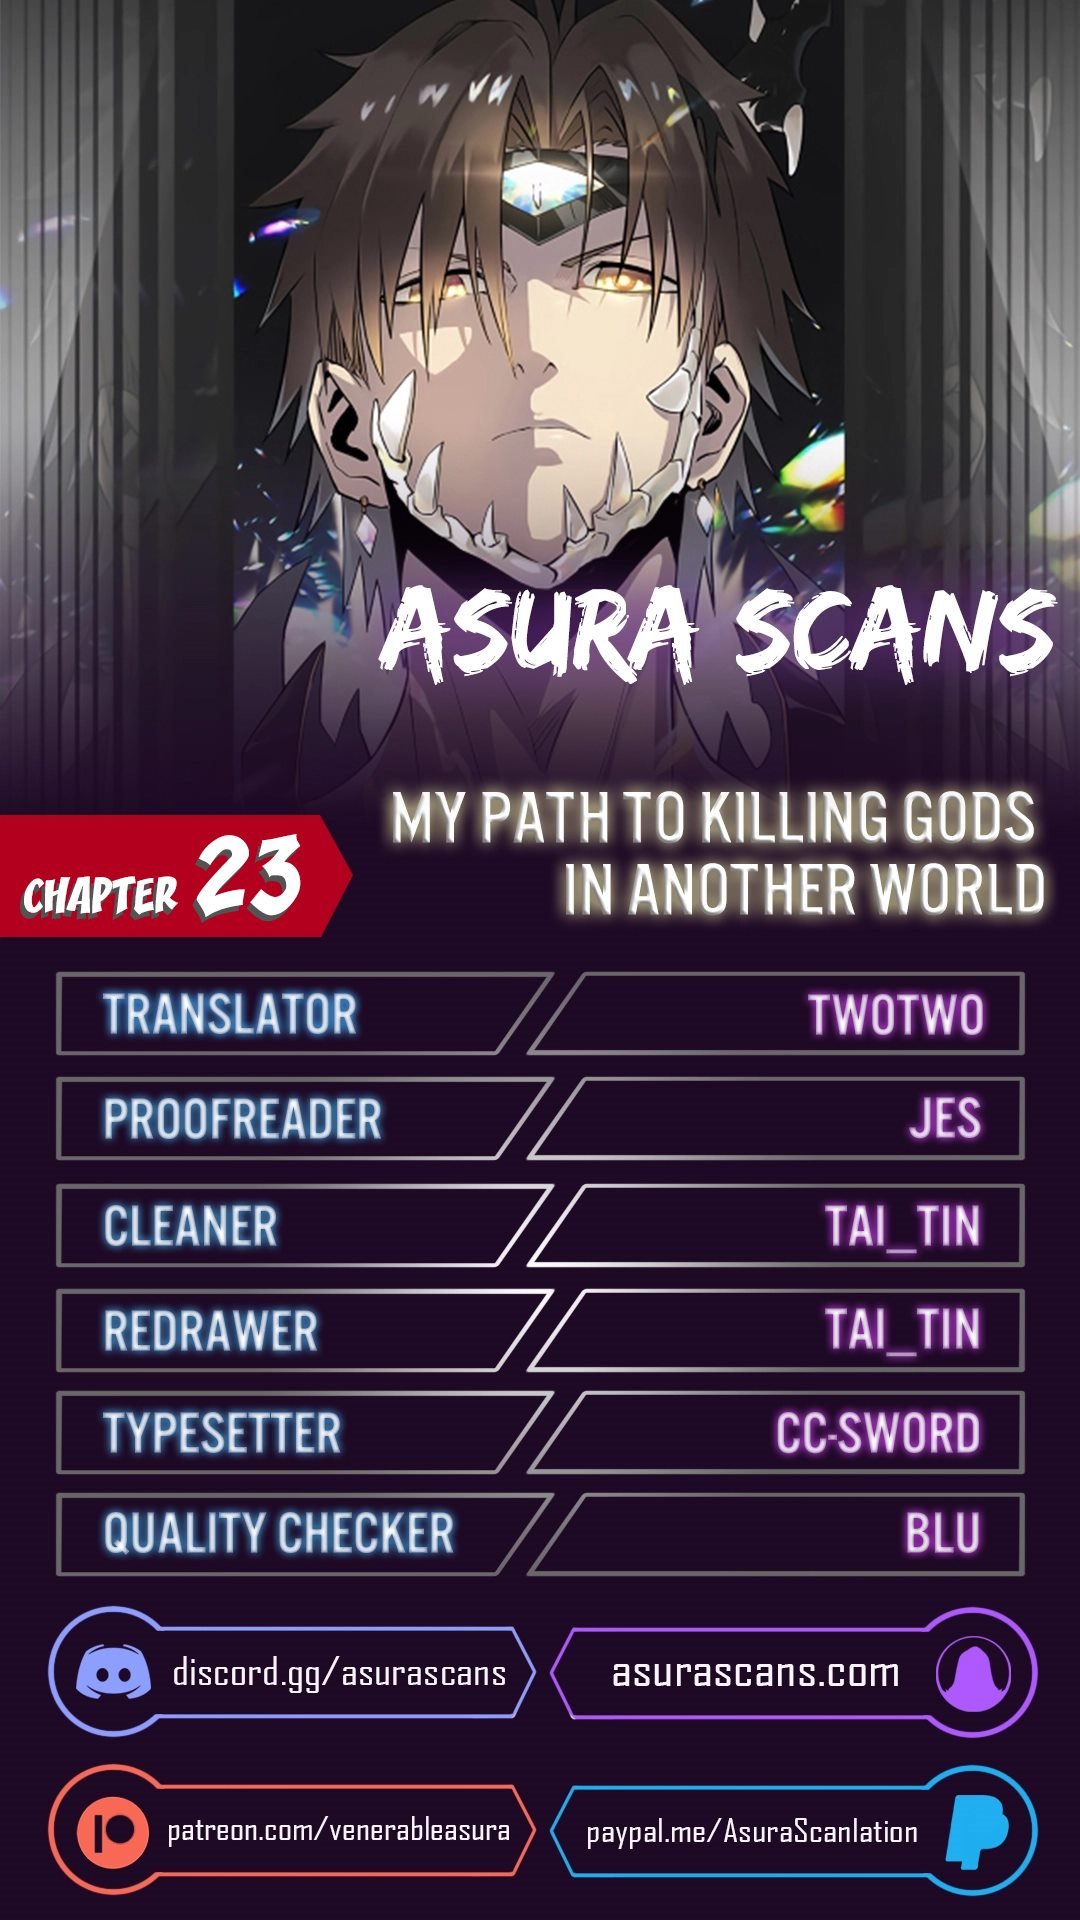 My Path to Killing Gods in Another World - Chapter 23174 - Image 1